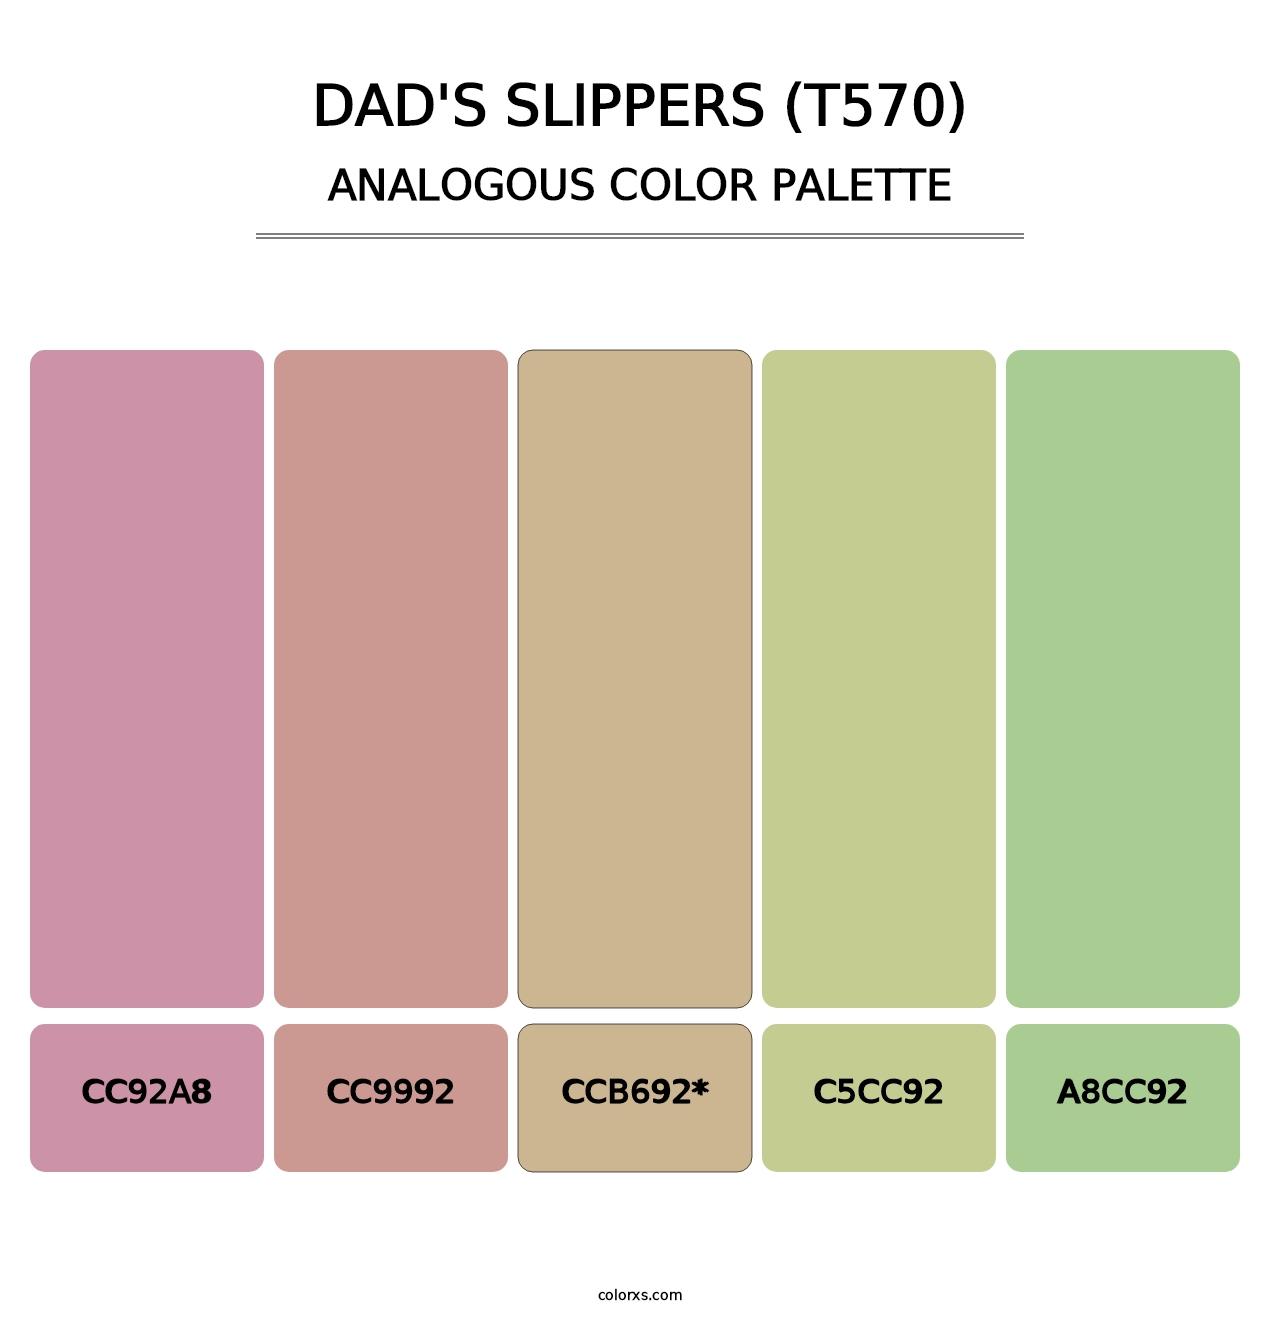 Dad's Slippers (T570) - Analogous Color Palette